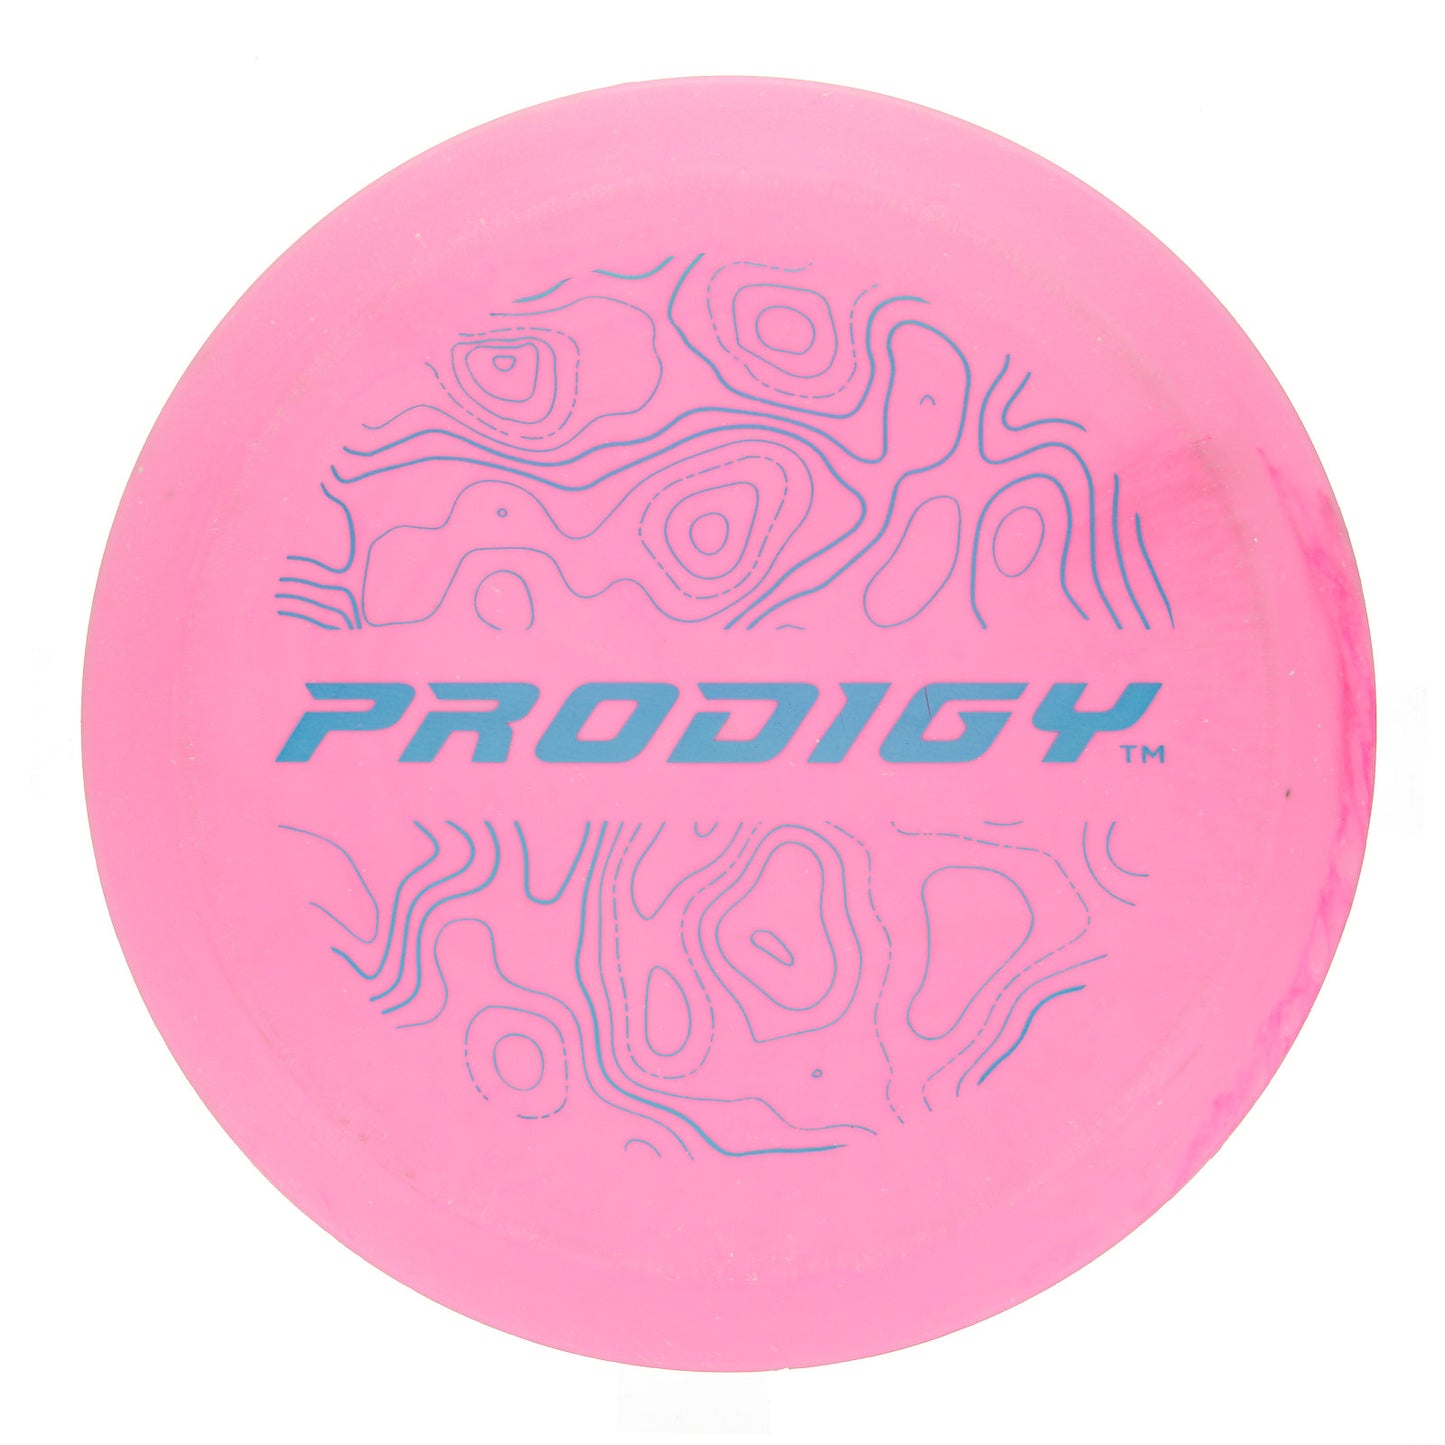 Prodigy H4 V2 - Topographic Stamp 300 173g | Style 0003